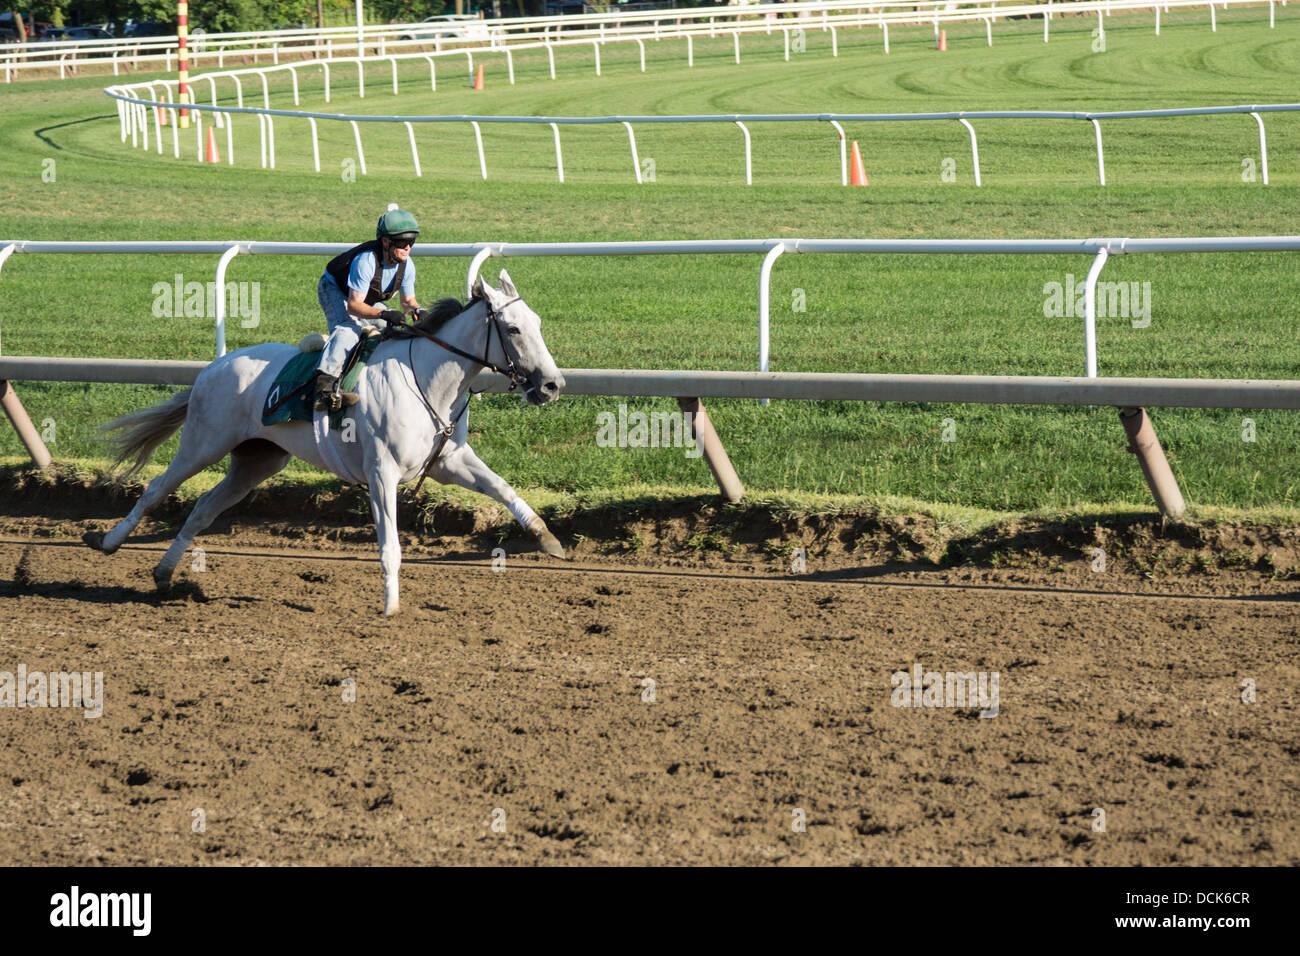 August 4, 2013. Saratoga Raceway New York. Exercise rider and thoroughbred horse in morning workout at Oklahoma Training Track. Stock Photo